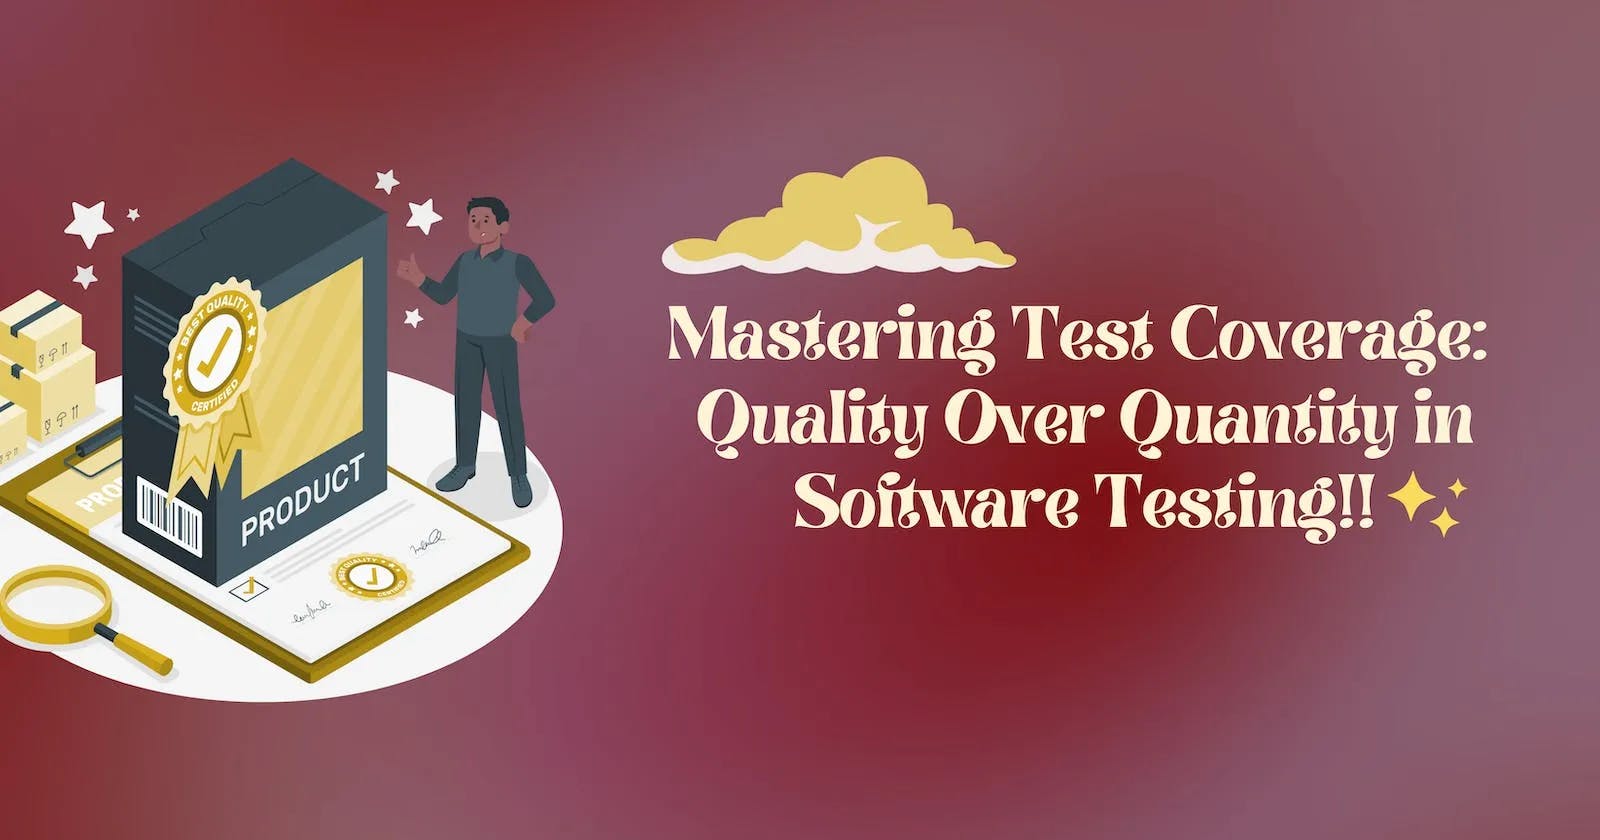 Cover Image for Mastering Test Coverage: Quality Over Quantity in Software Testing!!